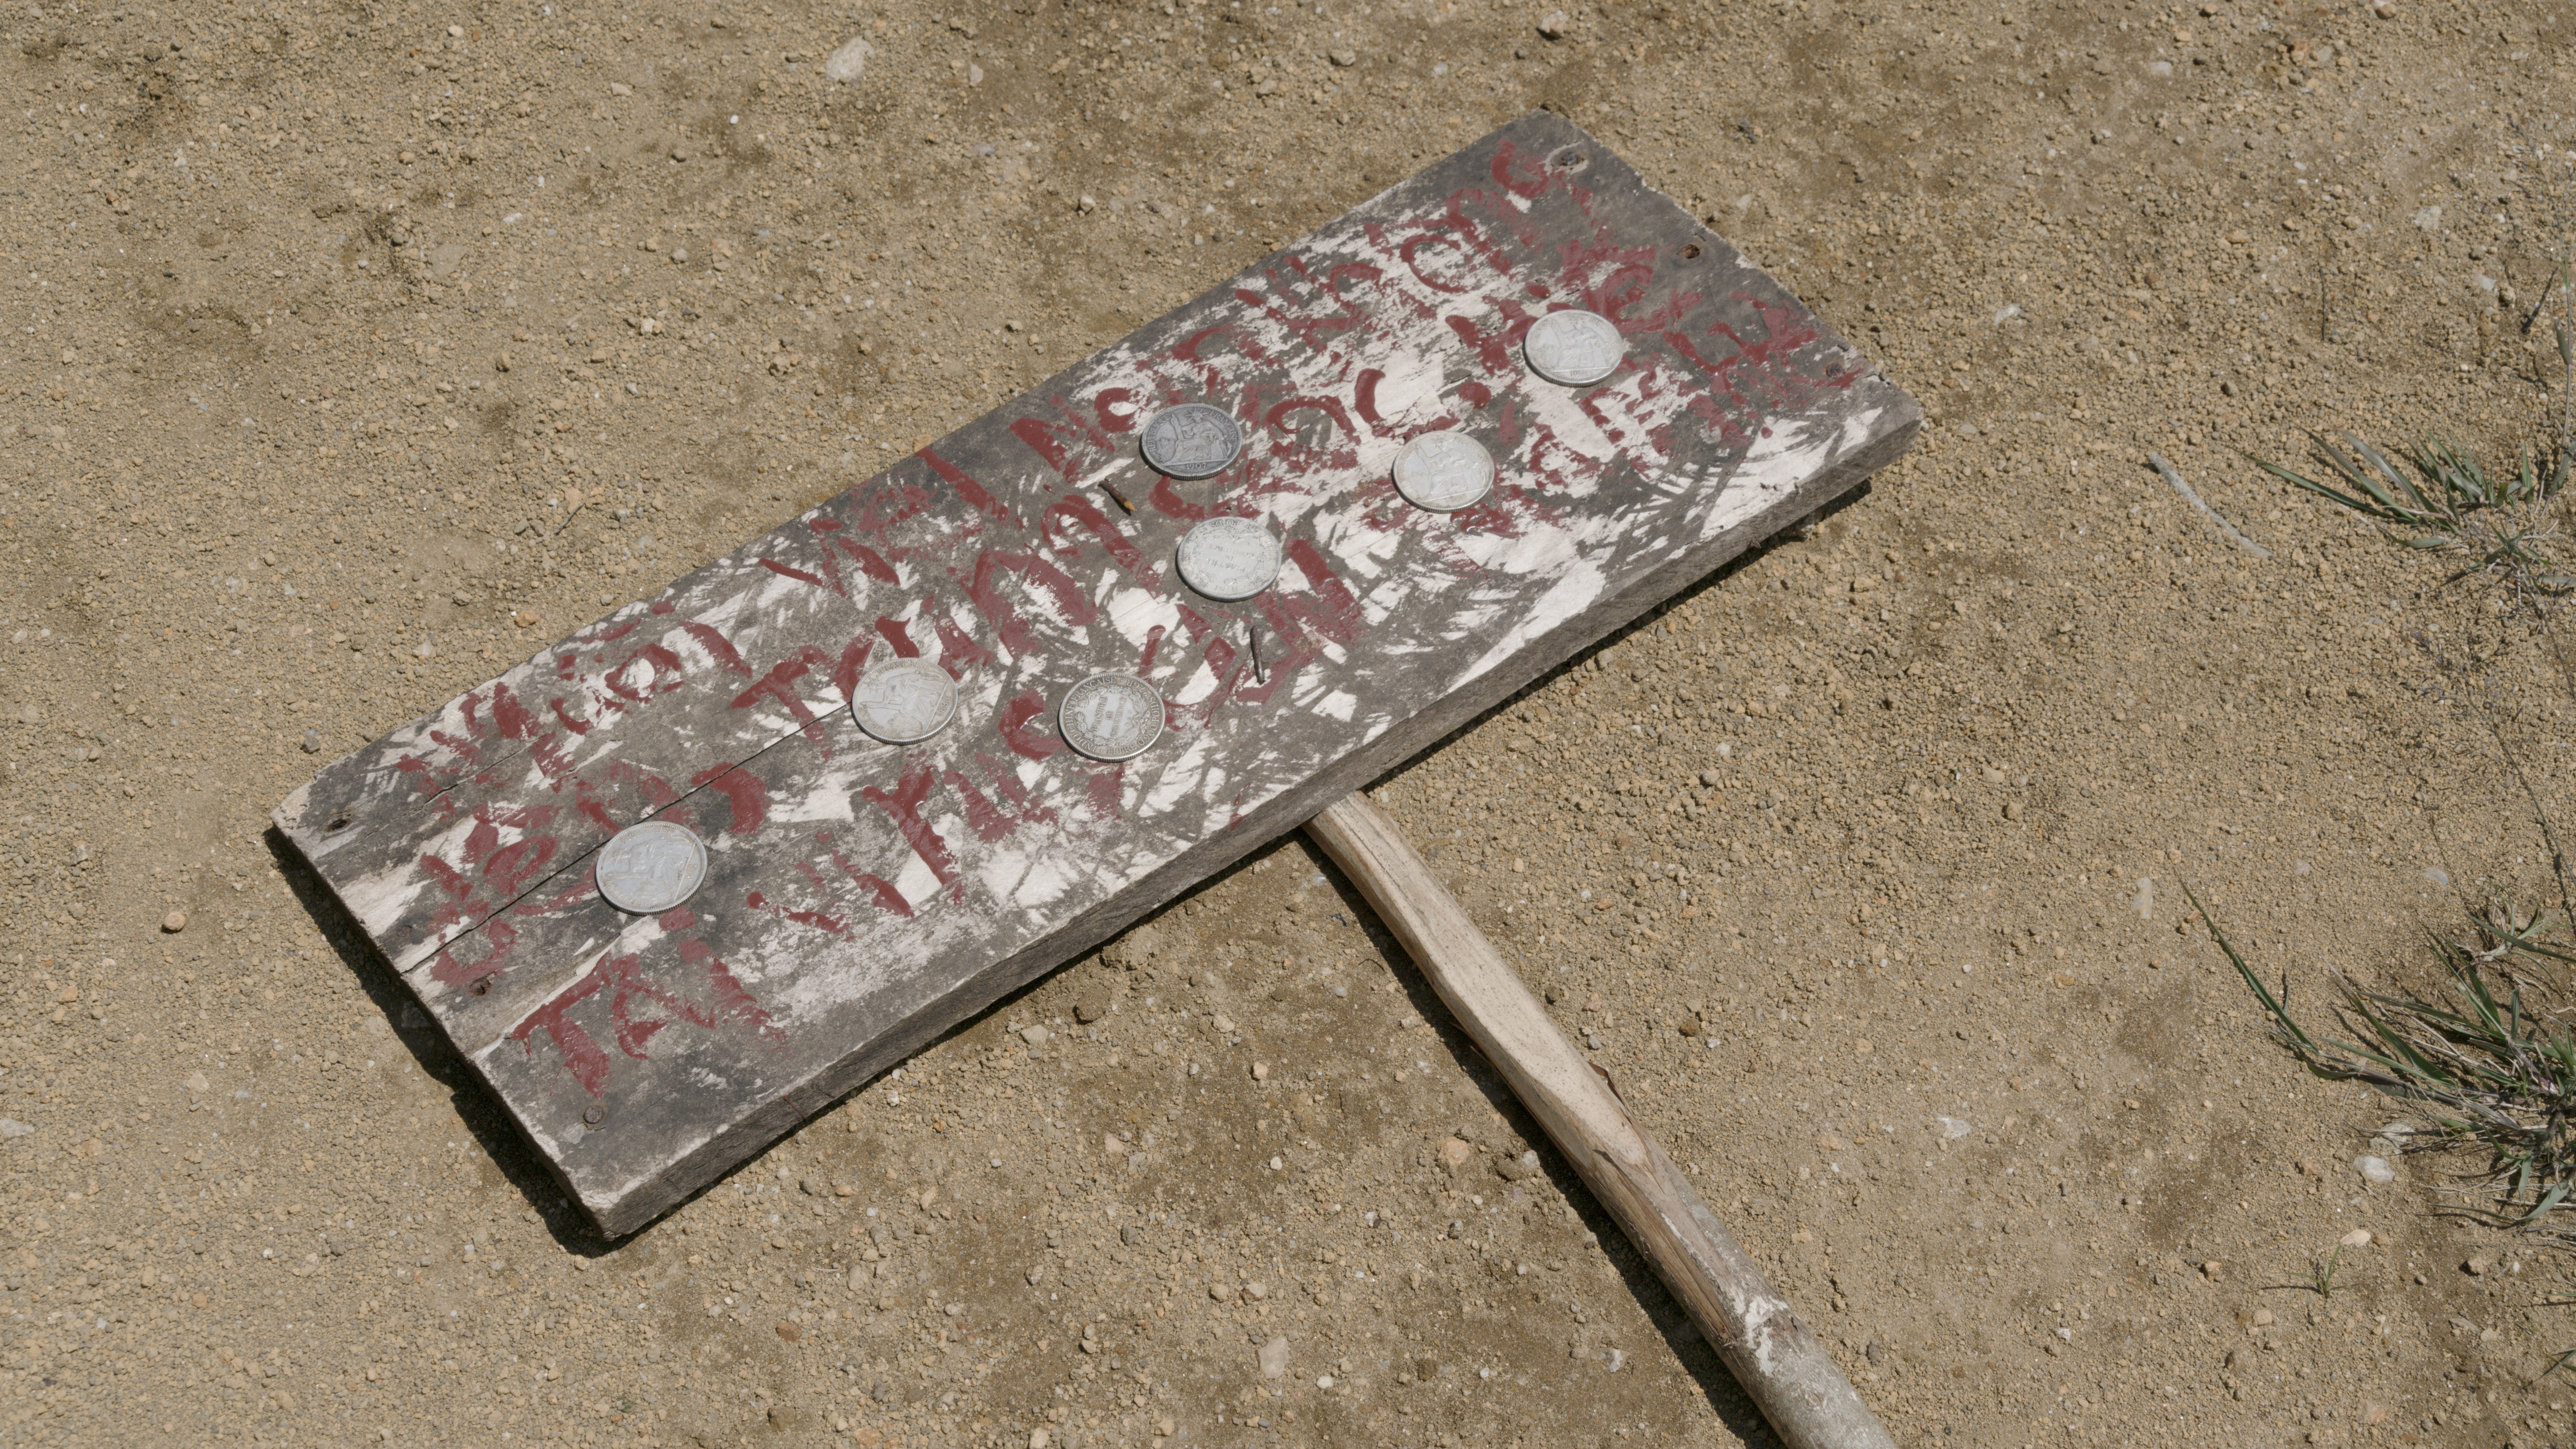 A wooden sign with red text sits on course dirt. & silver coins are places on the wooden sign, which has red text.